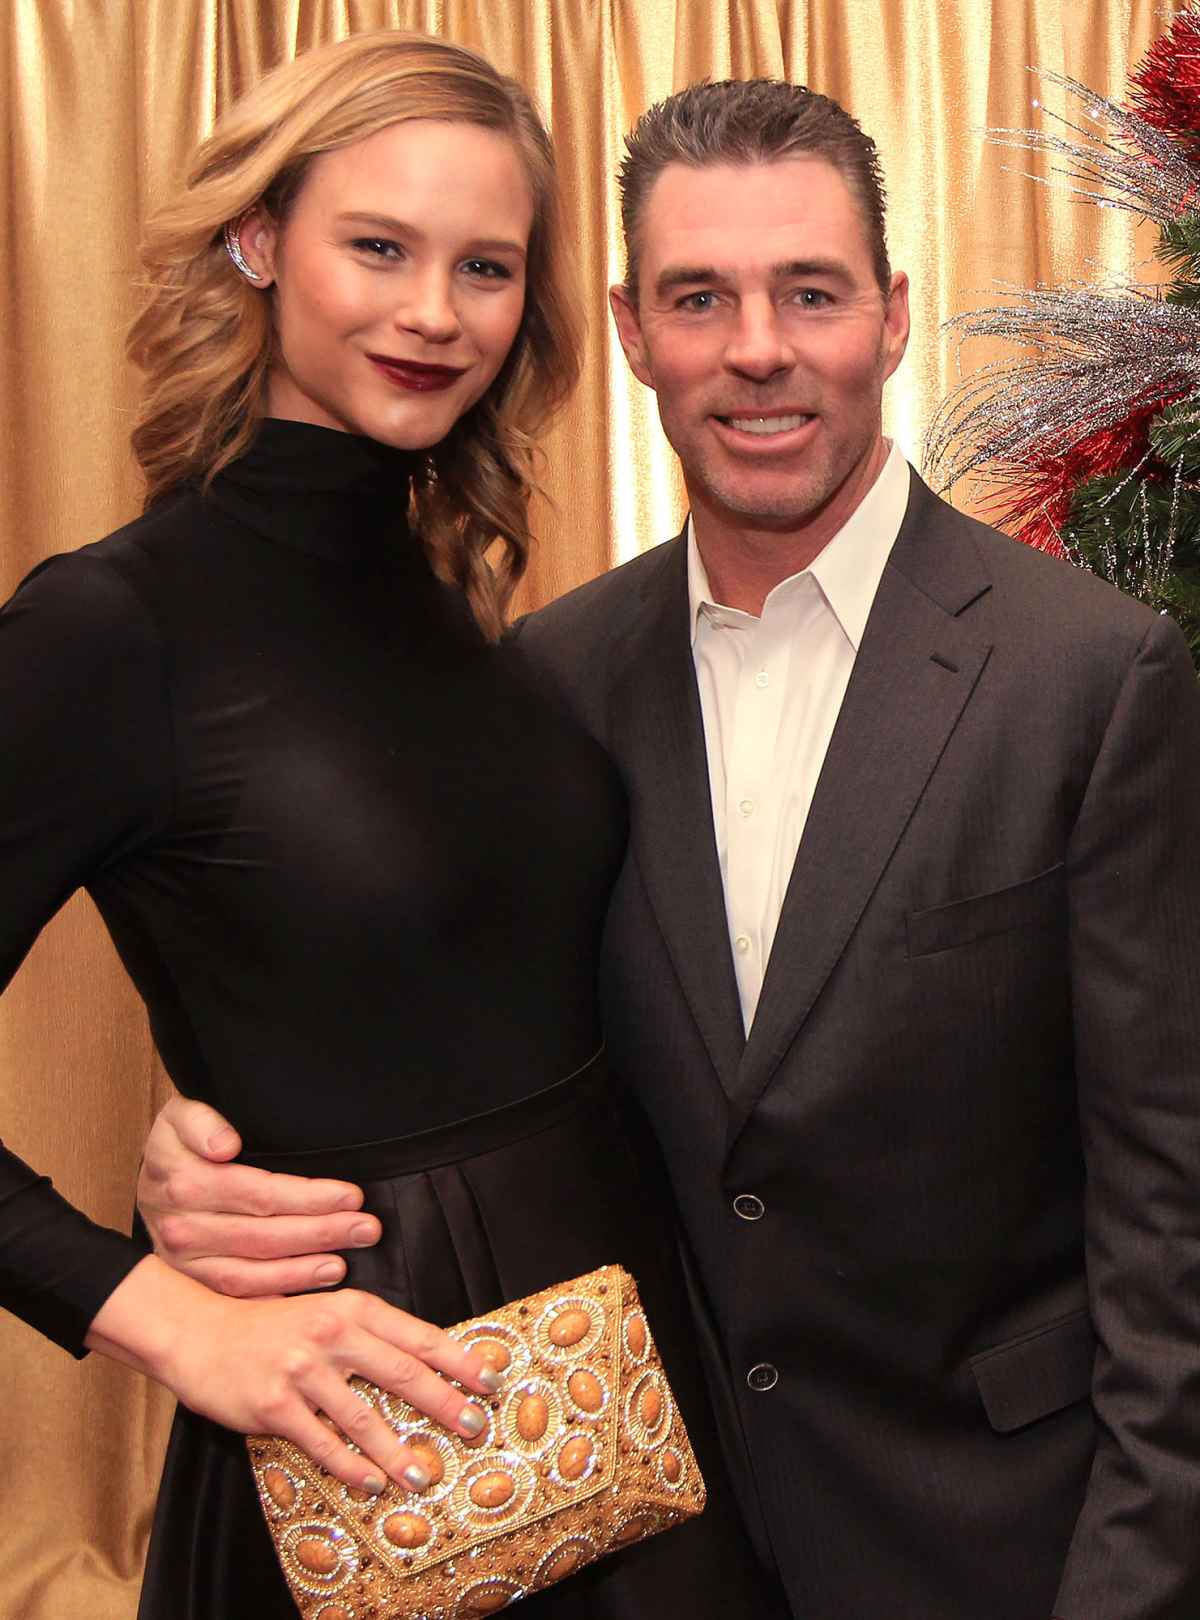 What Is Jim Edmonds' Net Worth? This 'Real Housewives Of Orange County'  Husband Has Had A Pretty Impressive Career